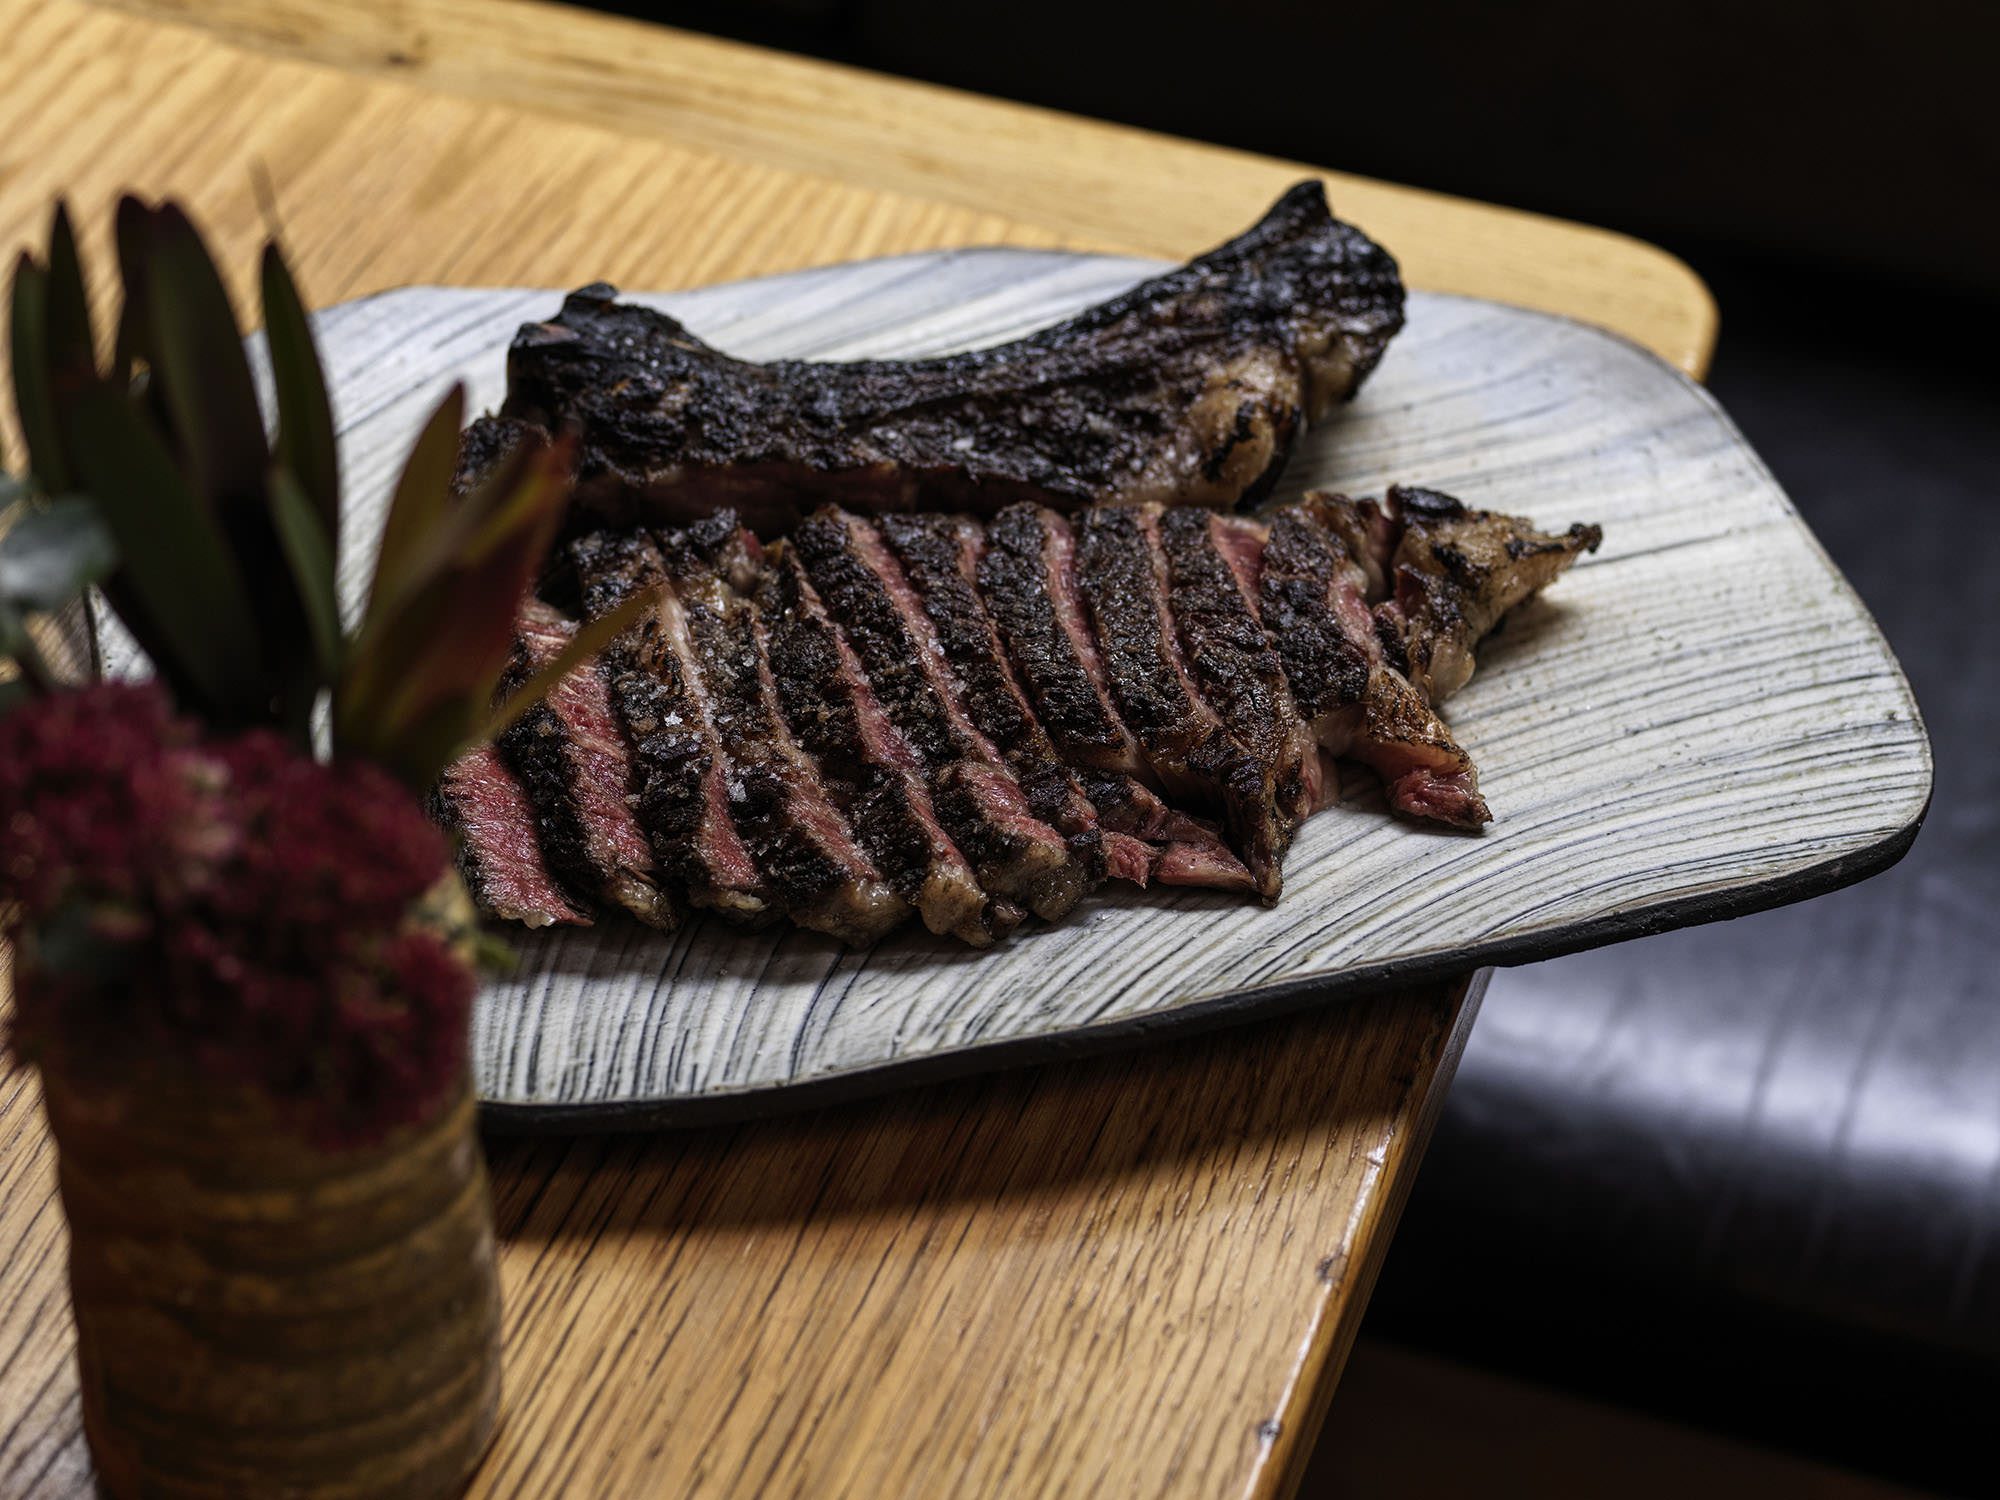 260 day dry aged Ranger’s Valley Black Market Rib Eye - the steak that brought Massimo Bottura to tears.